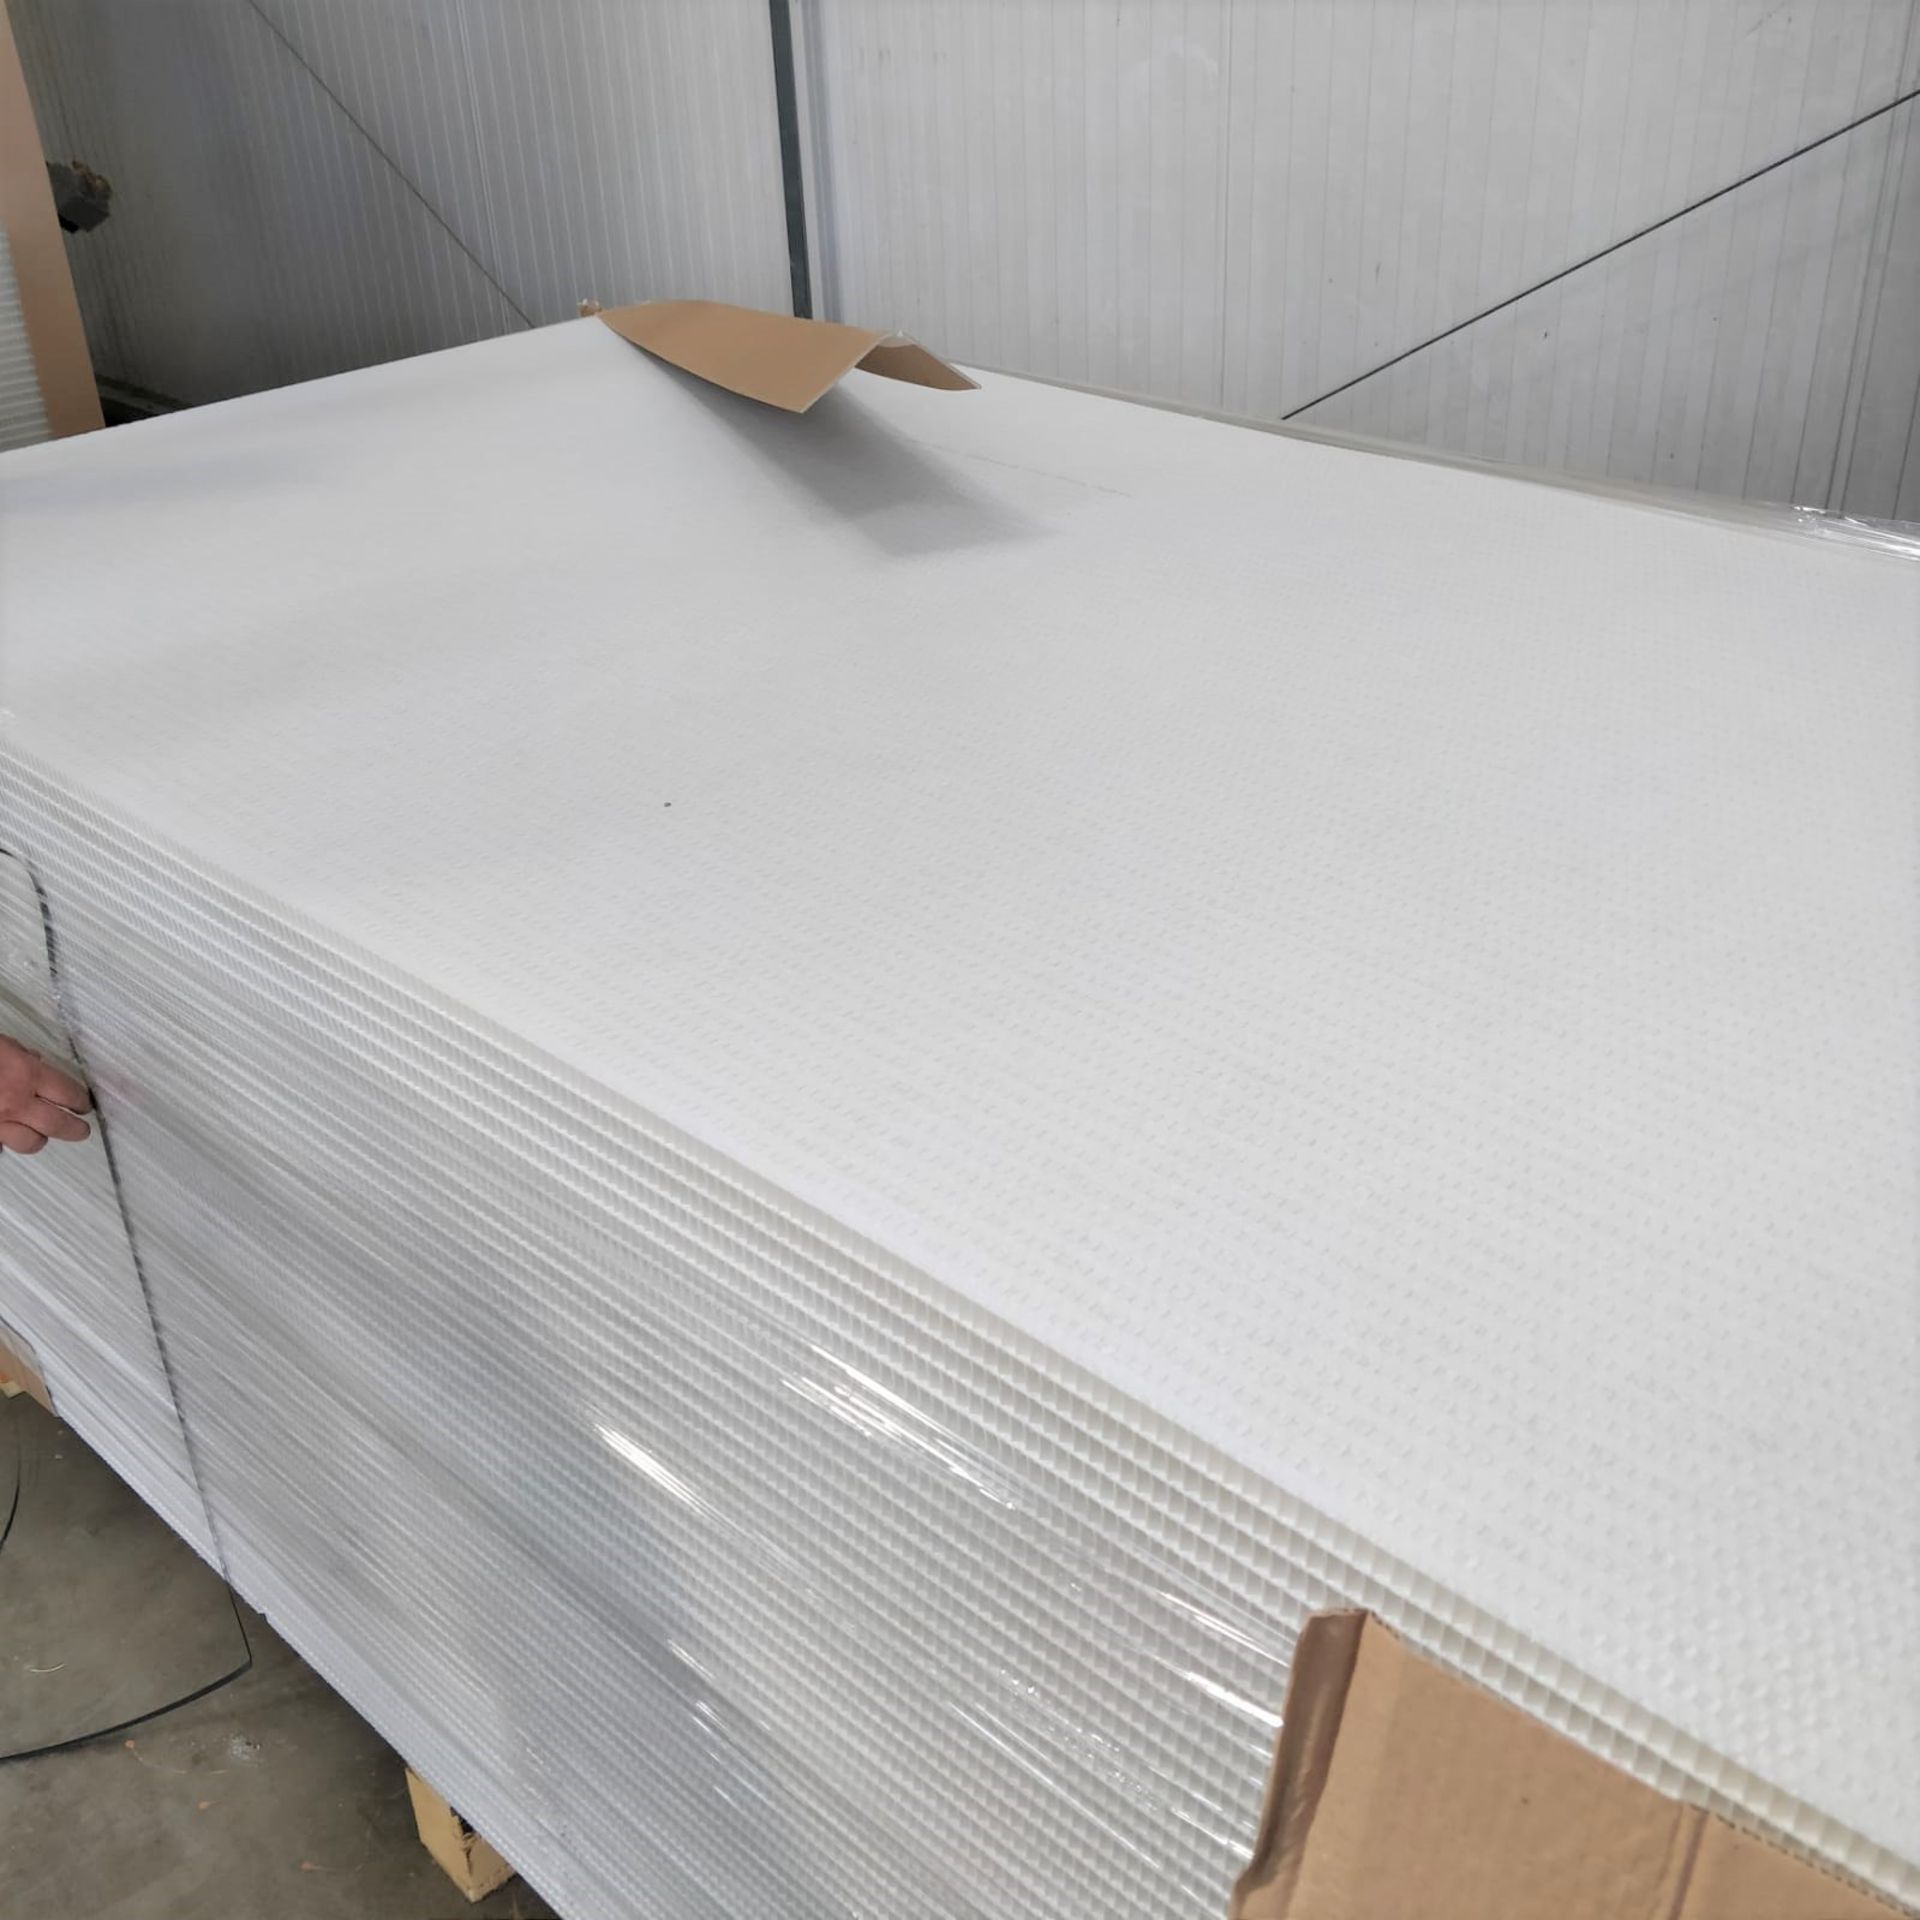 24 x ThermHex Thermoplastic Honeycomb Core Panels - Size Approx 2630 x 1210 x 18mm - New Stock - - Image 4 of 6